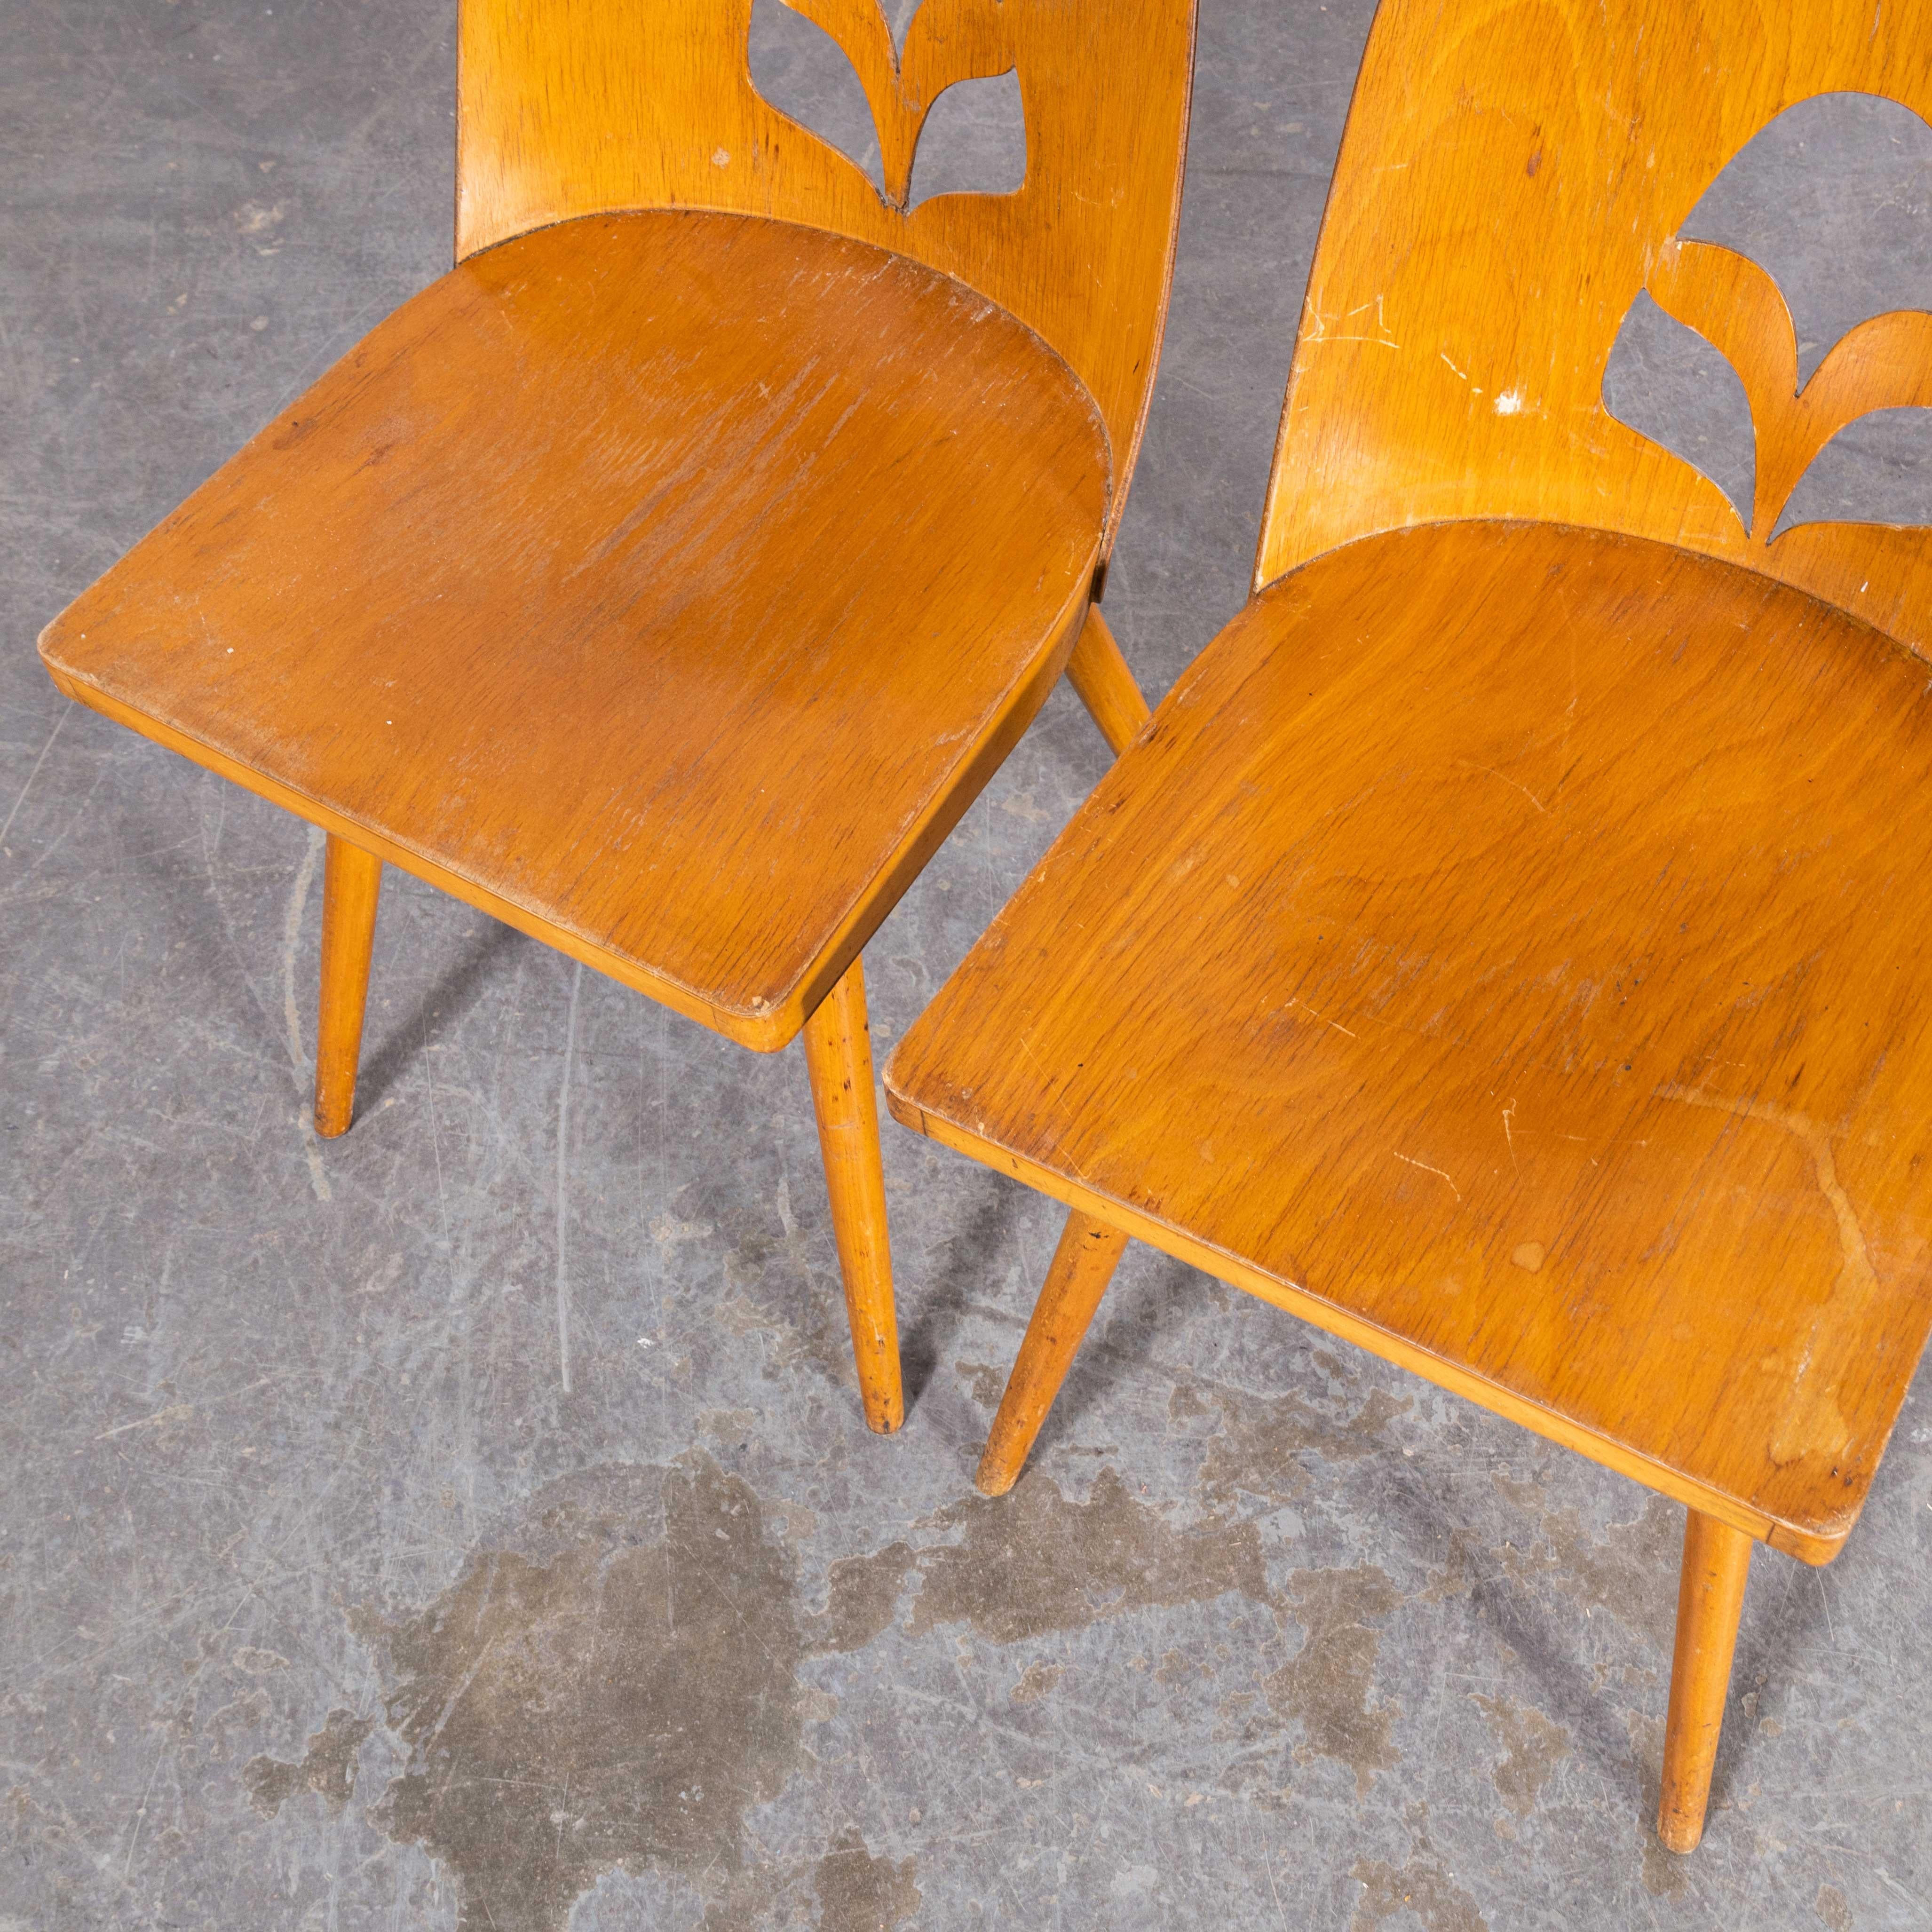 Wood 1950s Fretwork Detail Dining Chairs by Radomir Hoffman, Pair For Sale